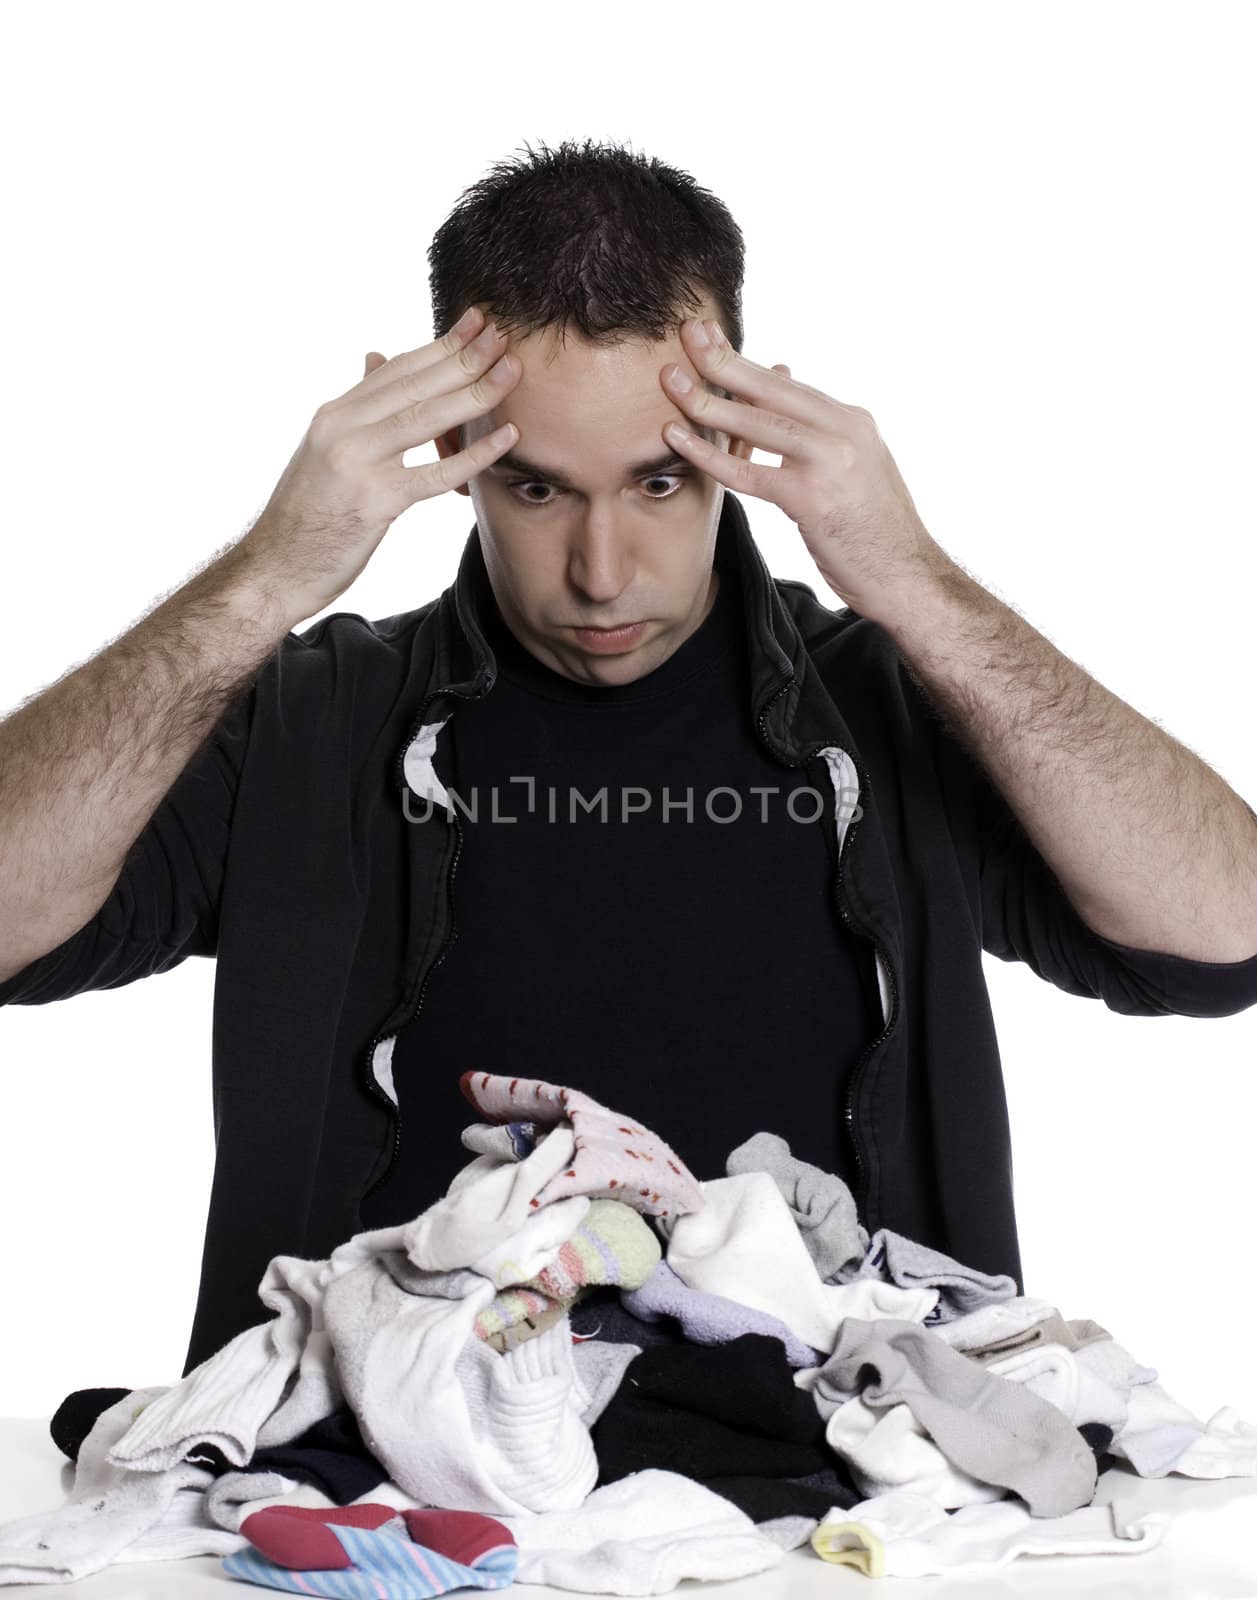 A young man looks frustrated at having to sort laundry or socks, isolated against a white background.